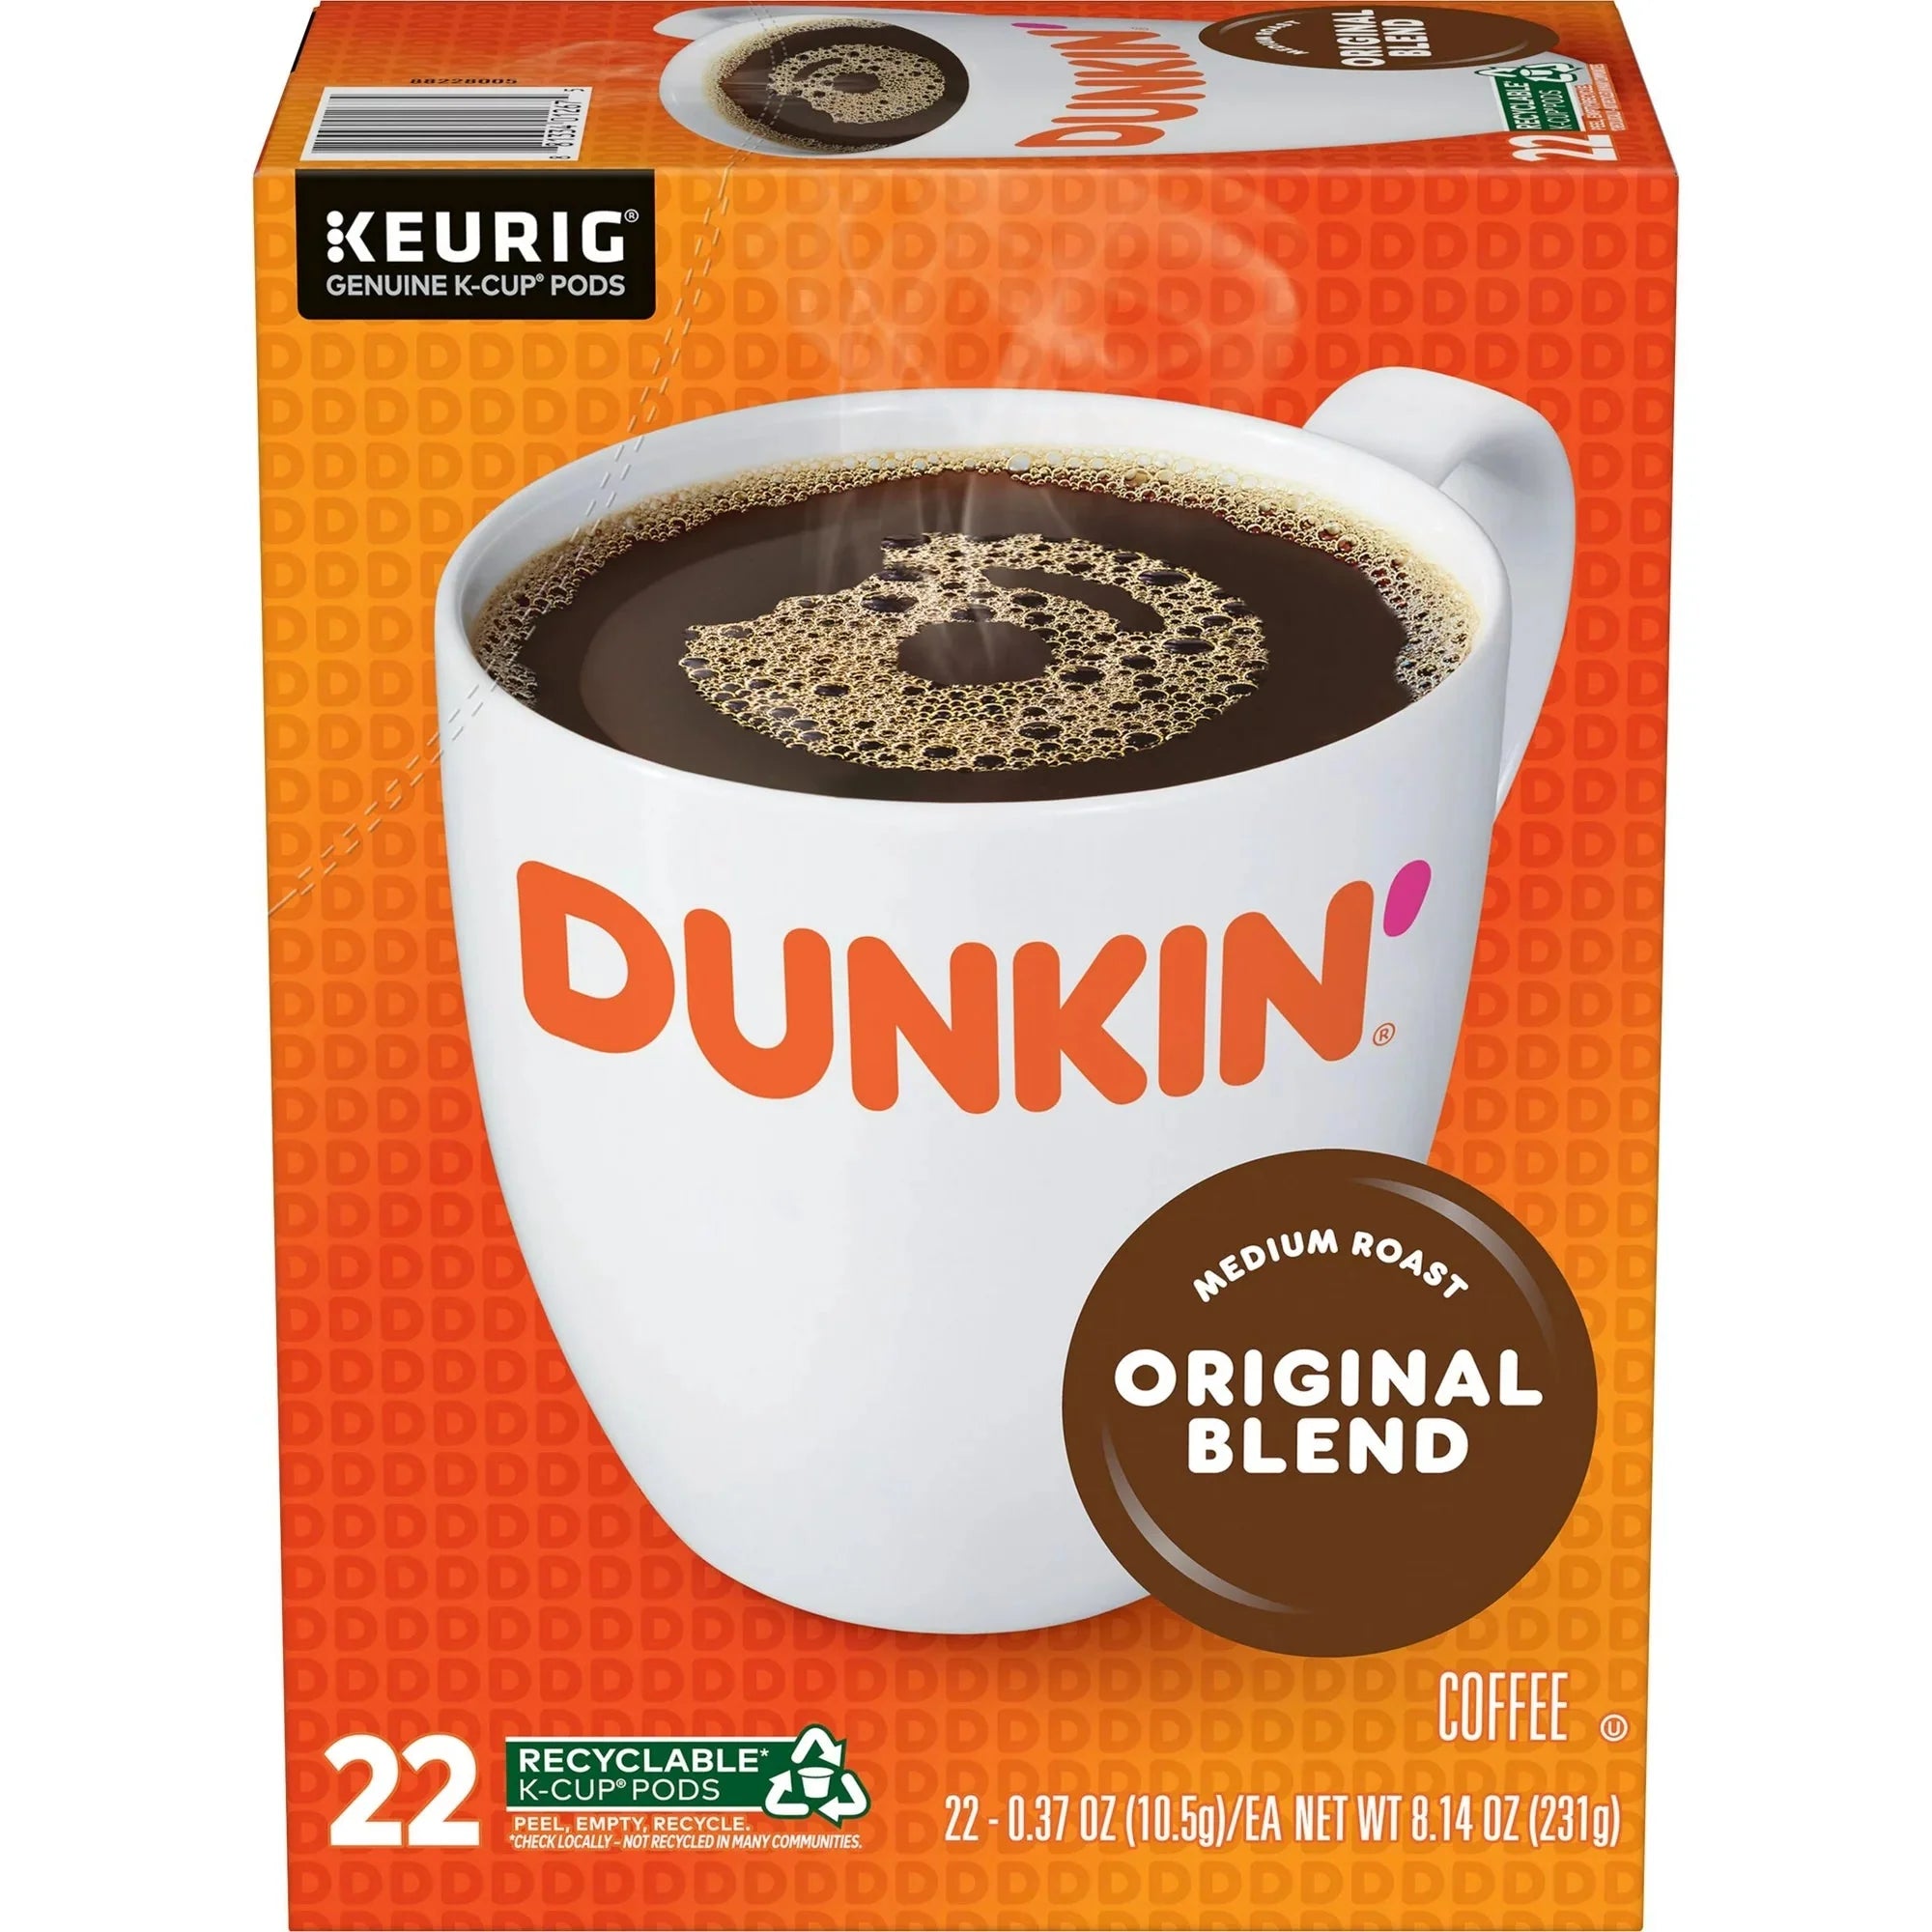 Wholesale prices with free shipping all over United States Dunkin' Original Blend Coffee, Medium Roast, K-Cup Pods, 22 Count Box - Steven Deals